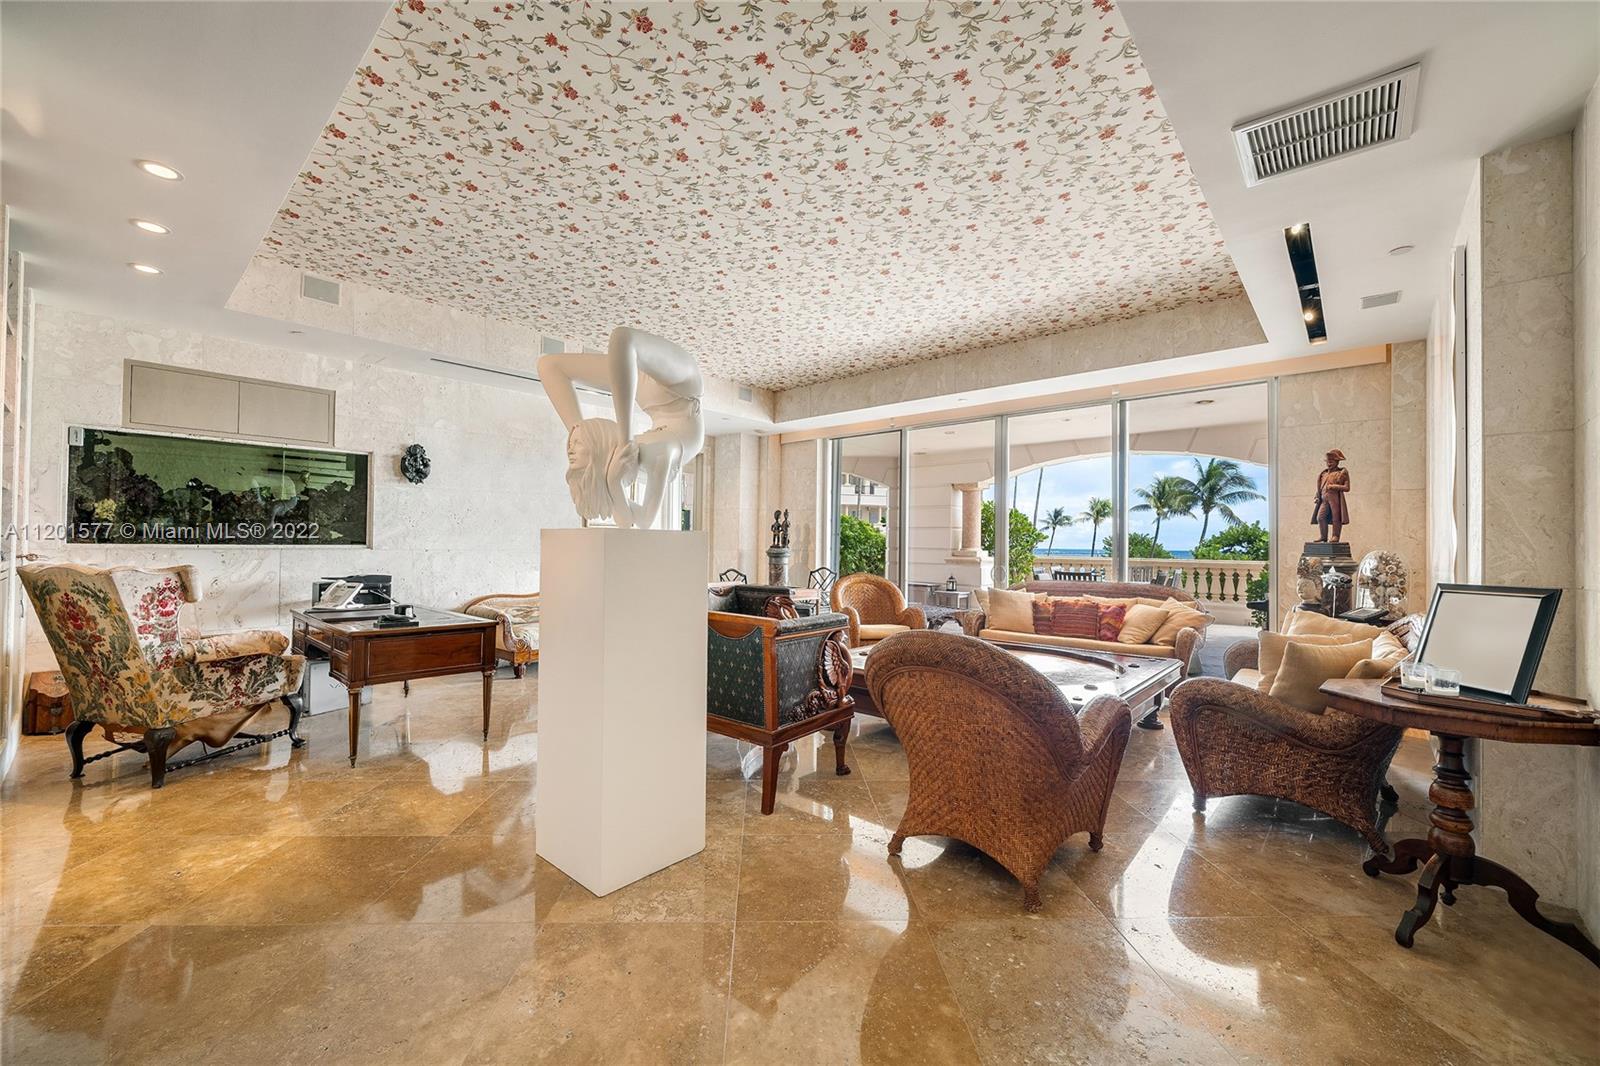 This one-of-a-kind 5BR/6+2BA ground floor townhouse is truly like no other on Fisher Island. The 2-story unit boasts 6,268 SF of luxury w/stunning custom finishes, coquina stone walls, exquisite marble floors & expansive ground floor terrace plus 2nd floor terrace both w/mesmerizing views of the beach & ocean. The principal suite is spacious, beautiful principal spa bathroom, adjacent family room, den/office & 2 additional bedrooms each w/full baths. The second level is accesses by an elegant stone/glass staircase & features a spacious formal living & dining rooms w/ terrace access & direct ocean views, chef’s kitchen w/top-of-the-line appliances, staff quarters & large guest suite. Your private beach awaits outside your home. 5-Star Fisher Island amenities complete this amazing offering.